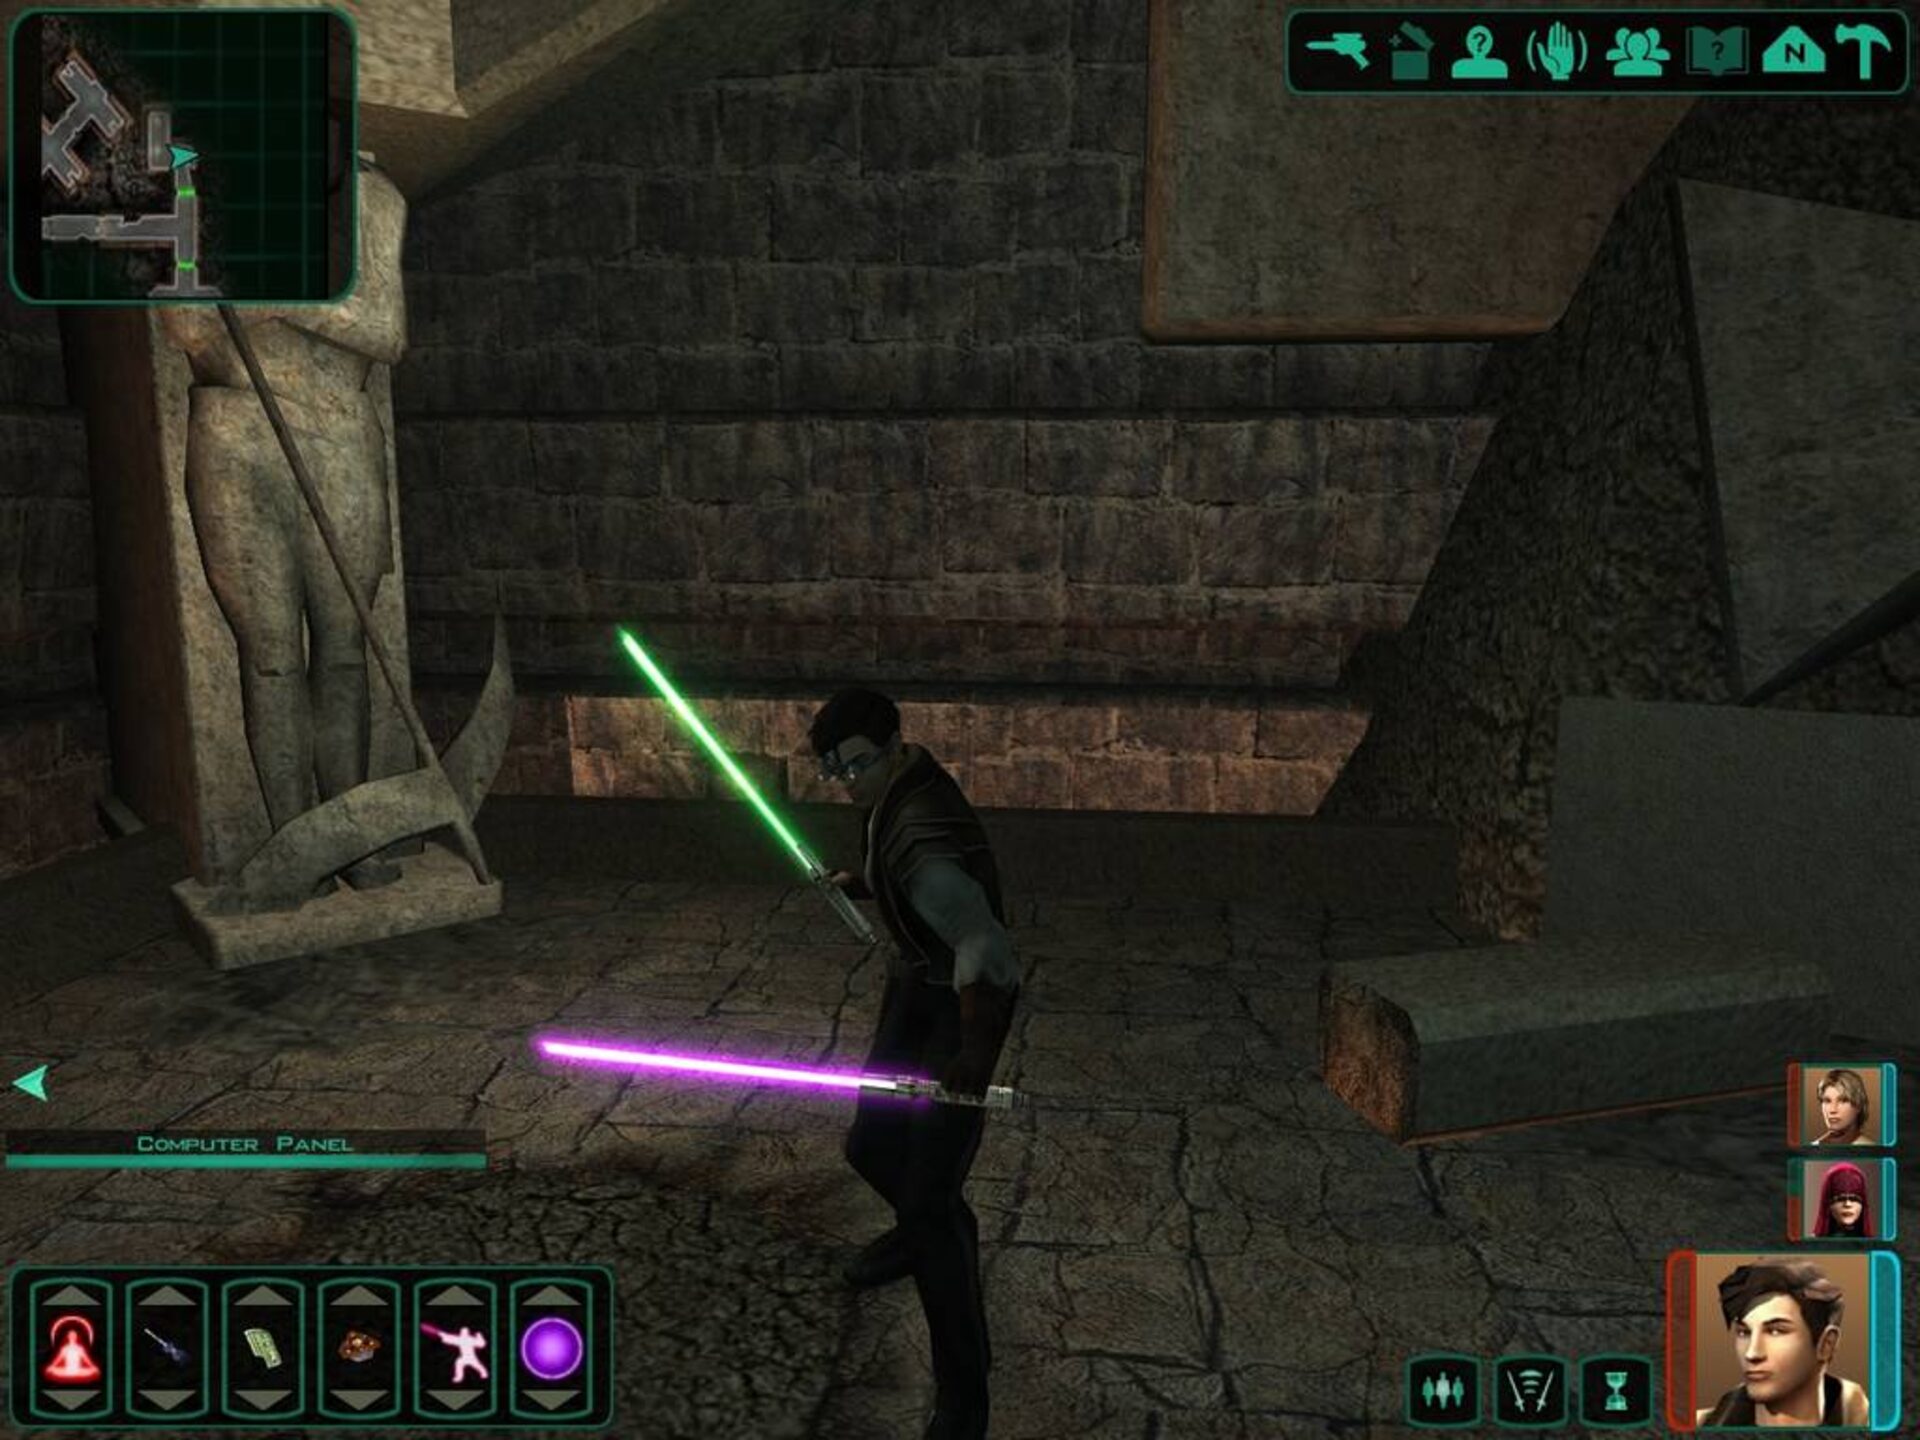 Star Wars Knights of the Old Republic for PC Game Steam Key Region